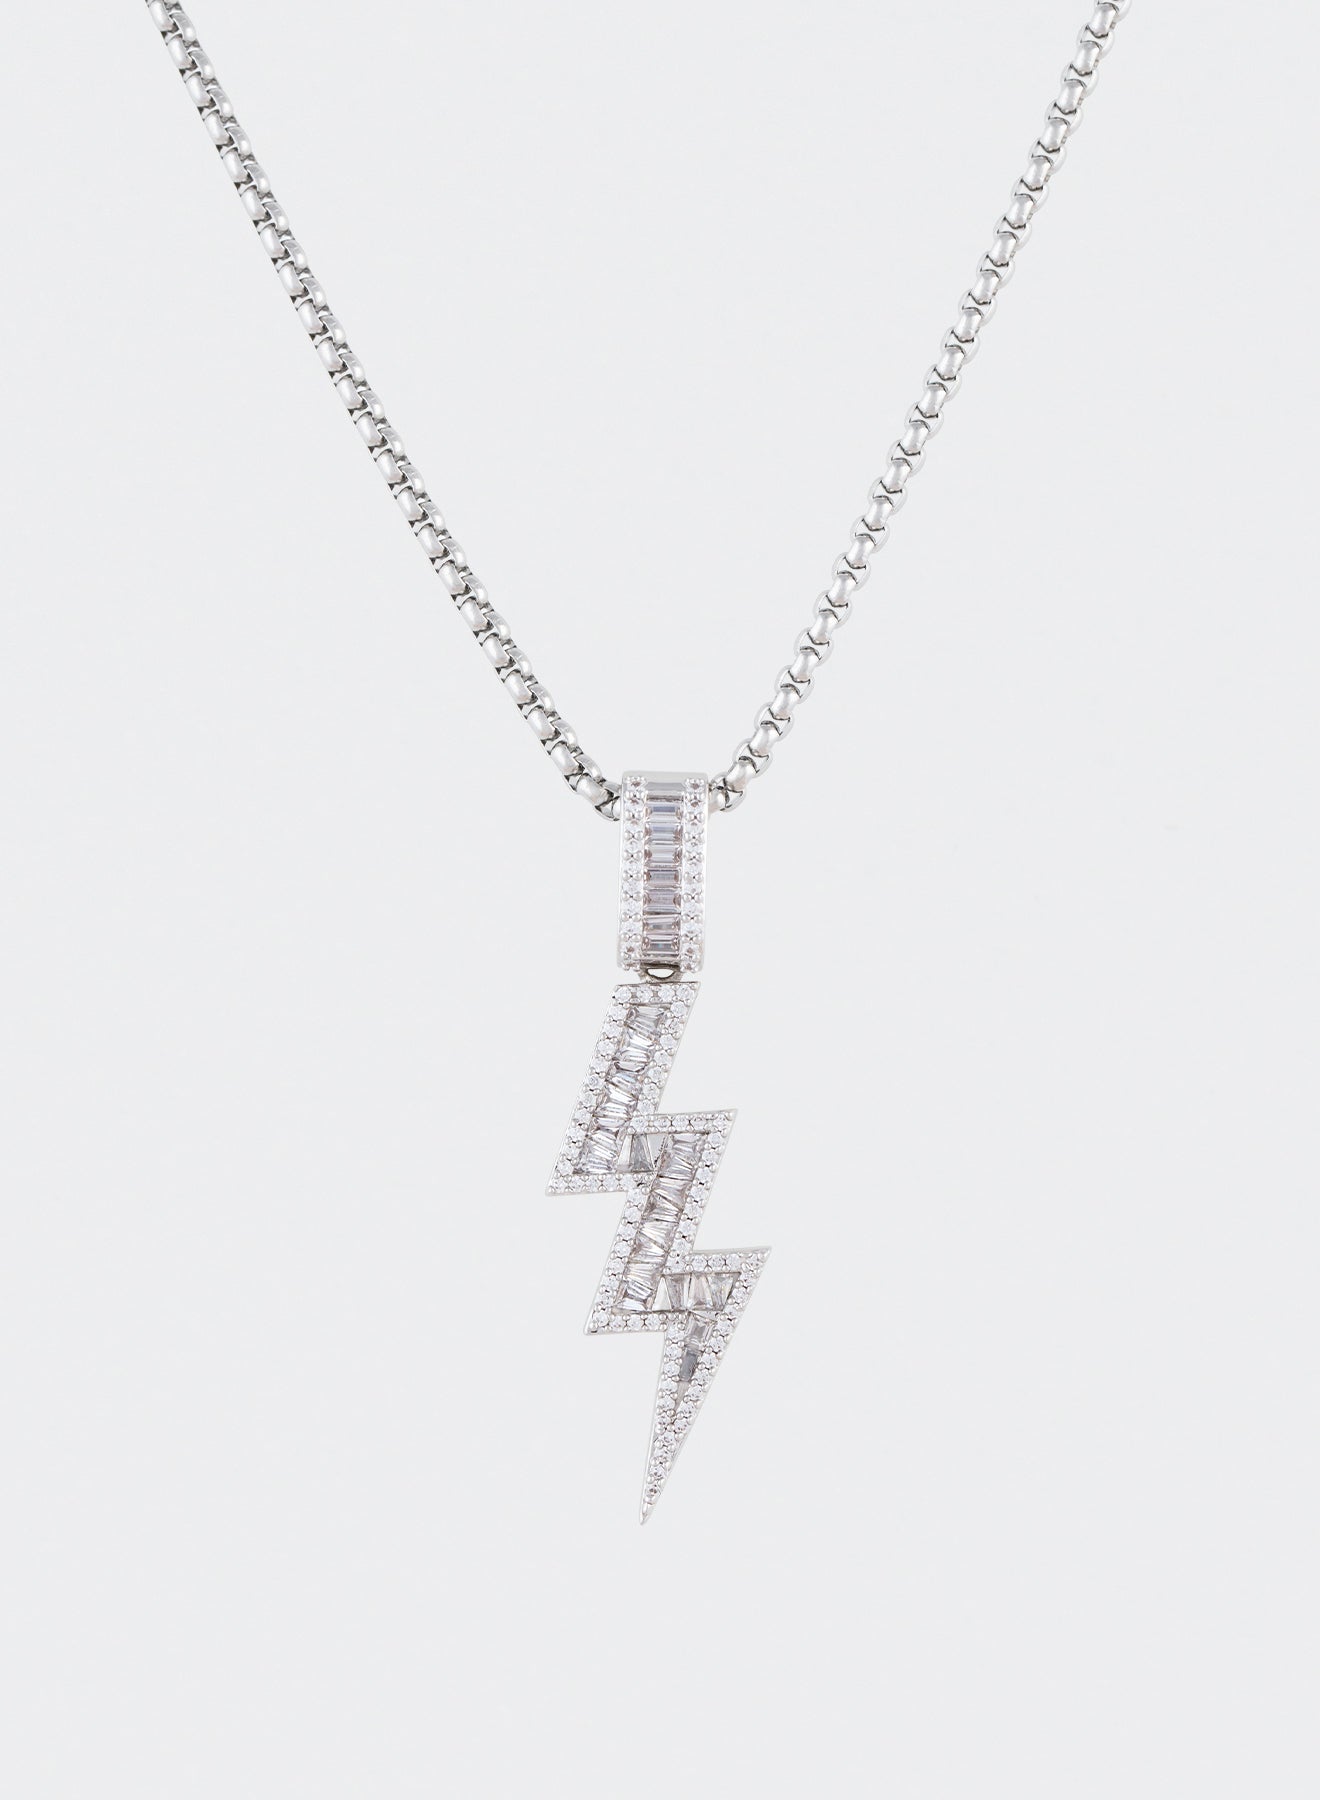 18k white gold coated thunder pendant necklace with hand-set micropavé and baguette-cut stones in white